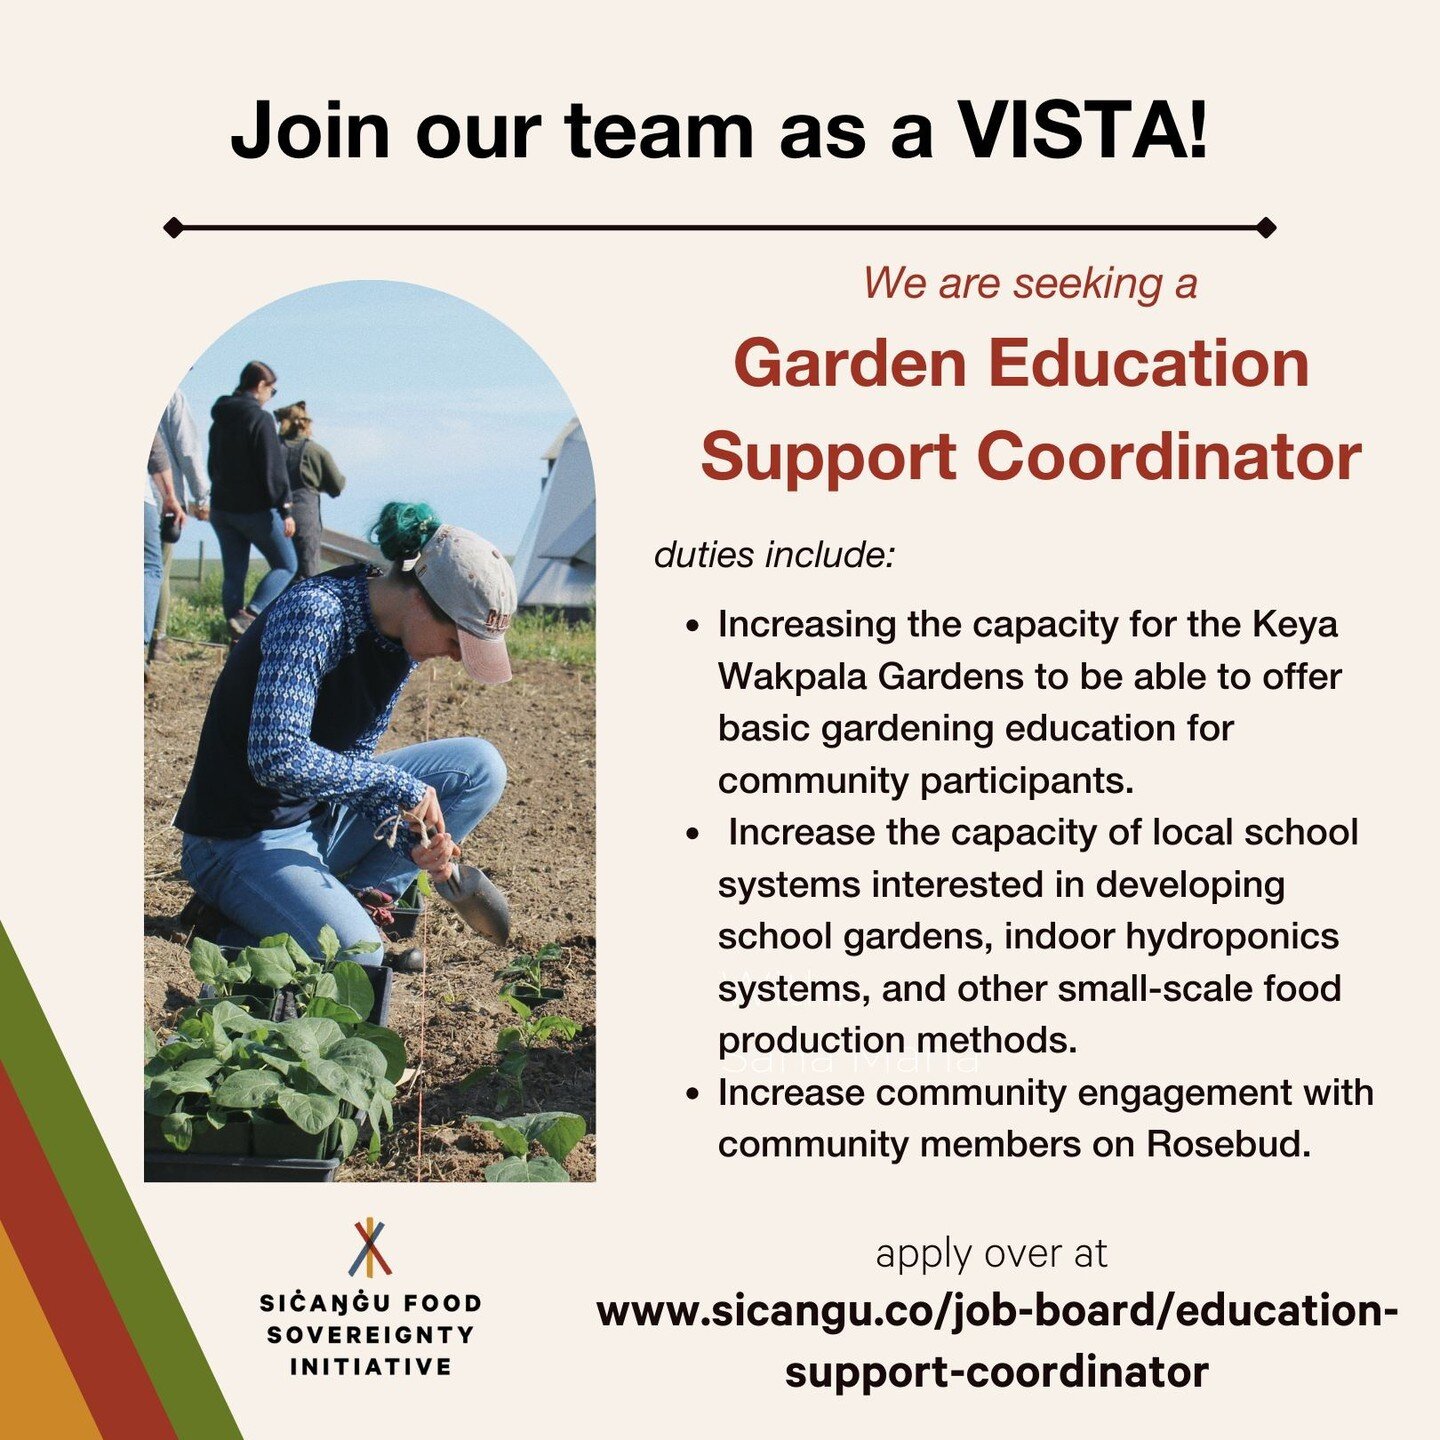 Join our Siċaƞġu Food Sovereignty team as an AmeriCorp VISTA!

We are currently seeking a Garden Education Support Coordinator.

You can find a full description of duties and apply by visiting link in bio!